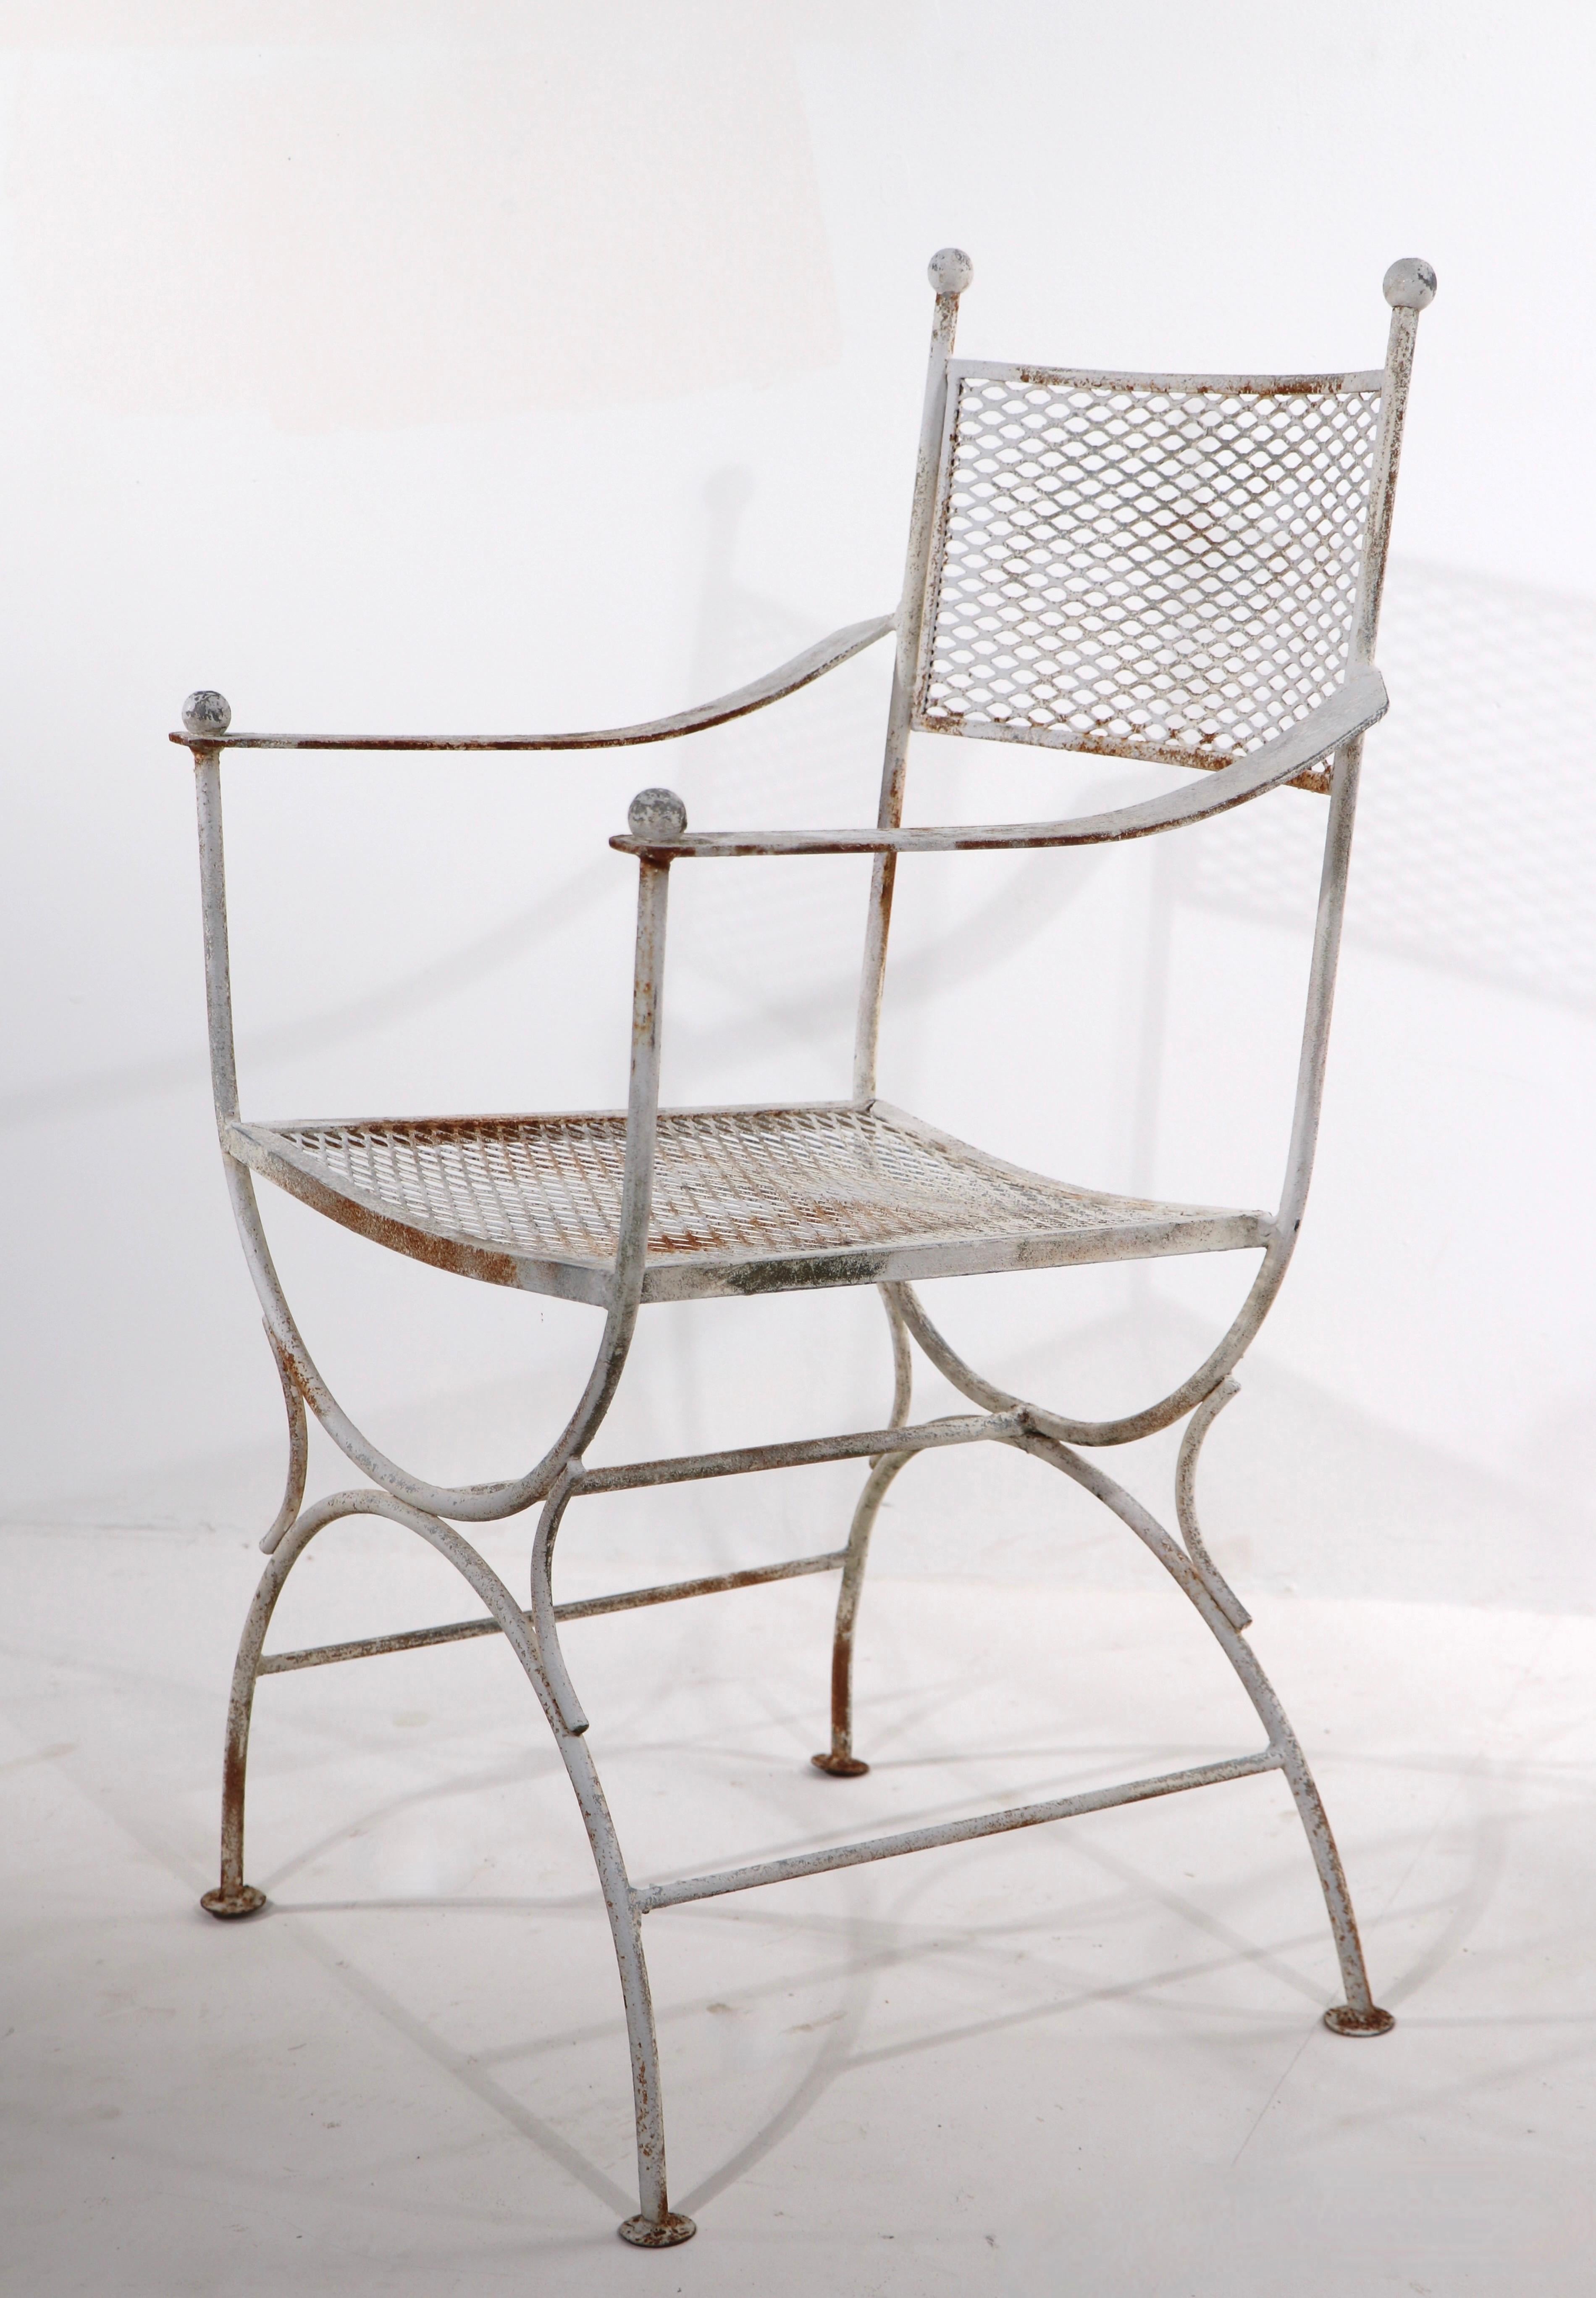 Hollywood Regency Pr. Wrought Iron Patio Garden Chairs attributed to Salterini